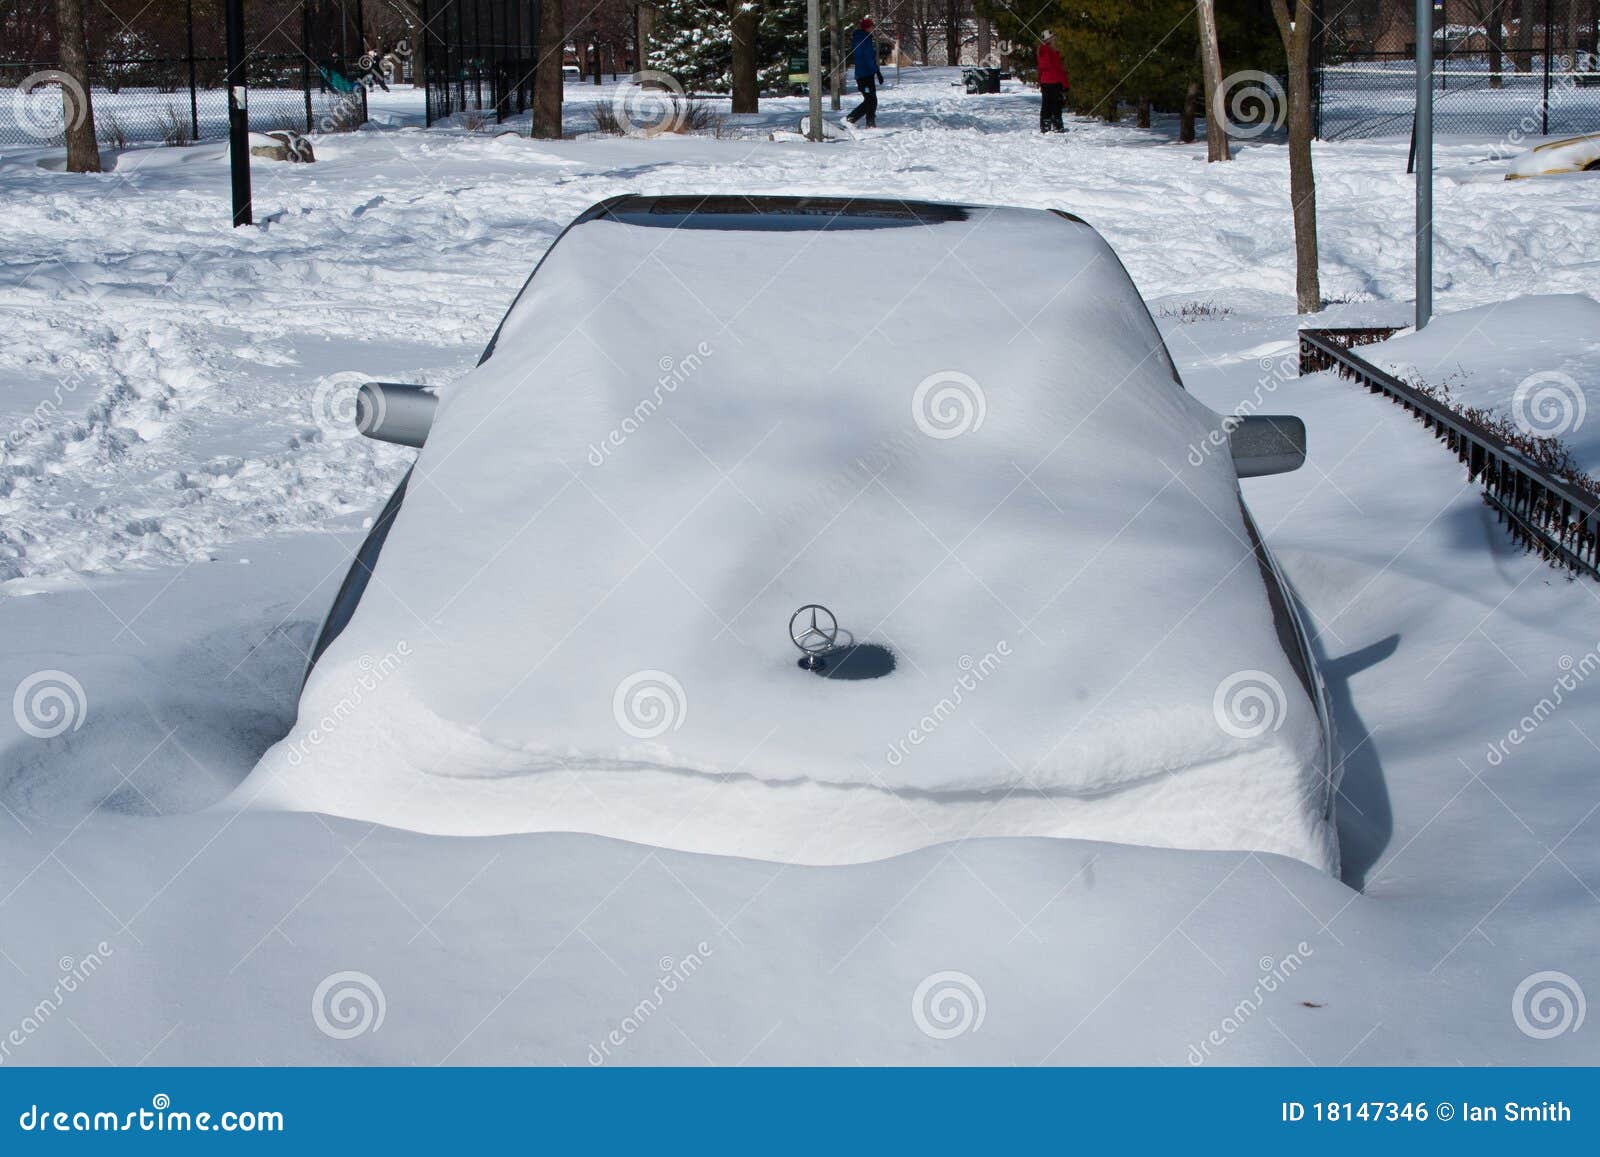 clipart cars in snow - photo #20